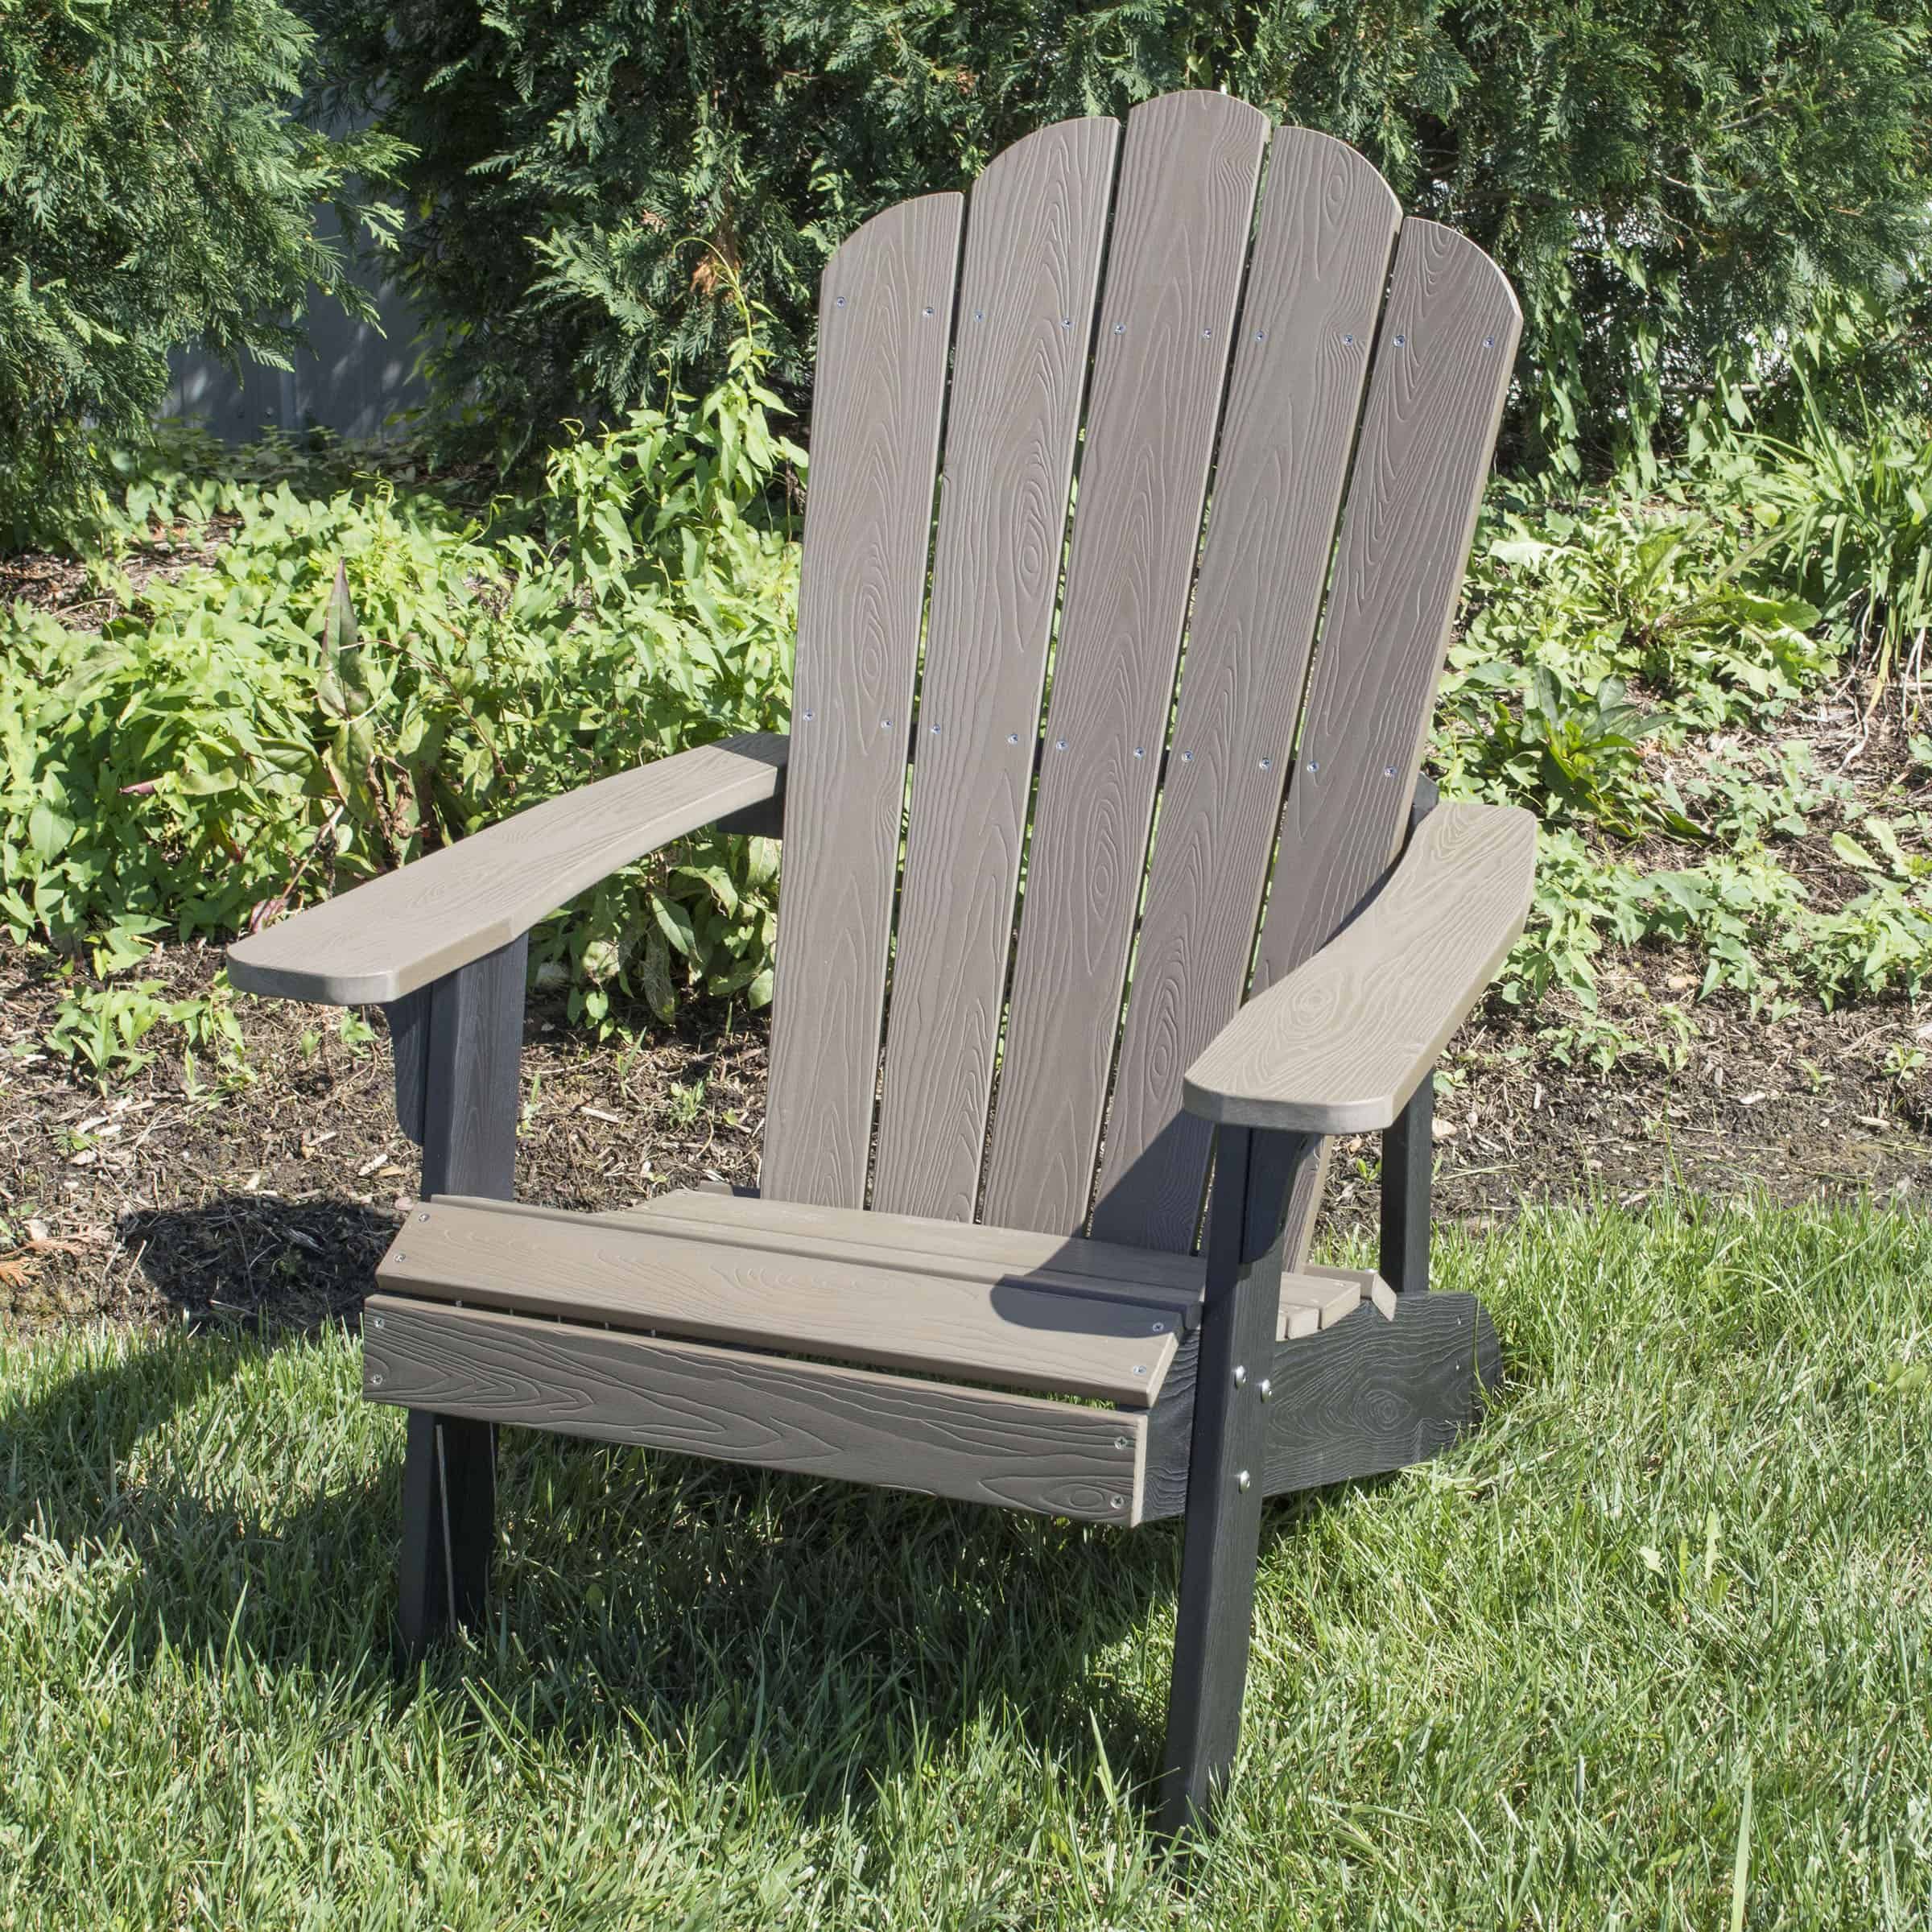 Amerihome Simulated Wood Outdoor Two Tone Adirondack Chair, Driftwood In Wood Outdoor Armchair Sets (View 7 of 15)